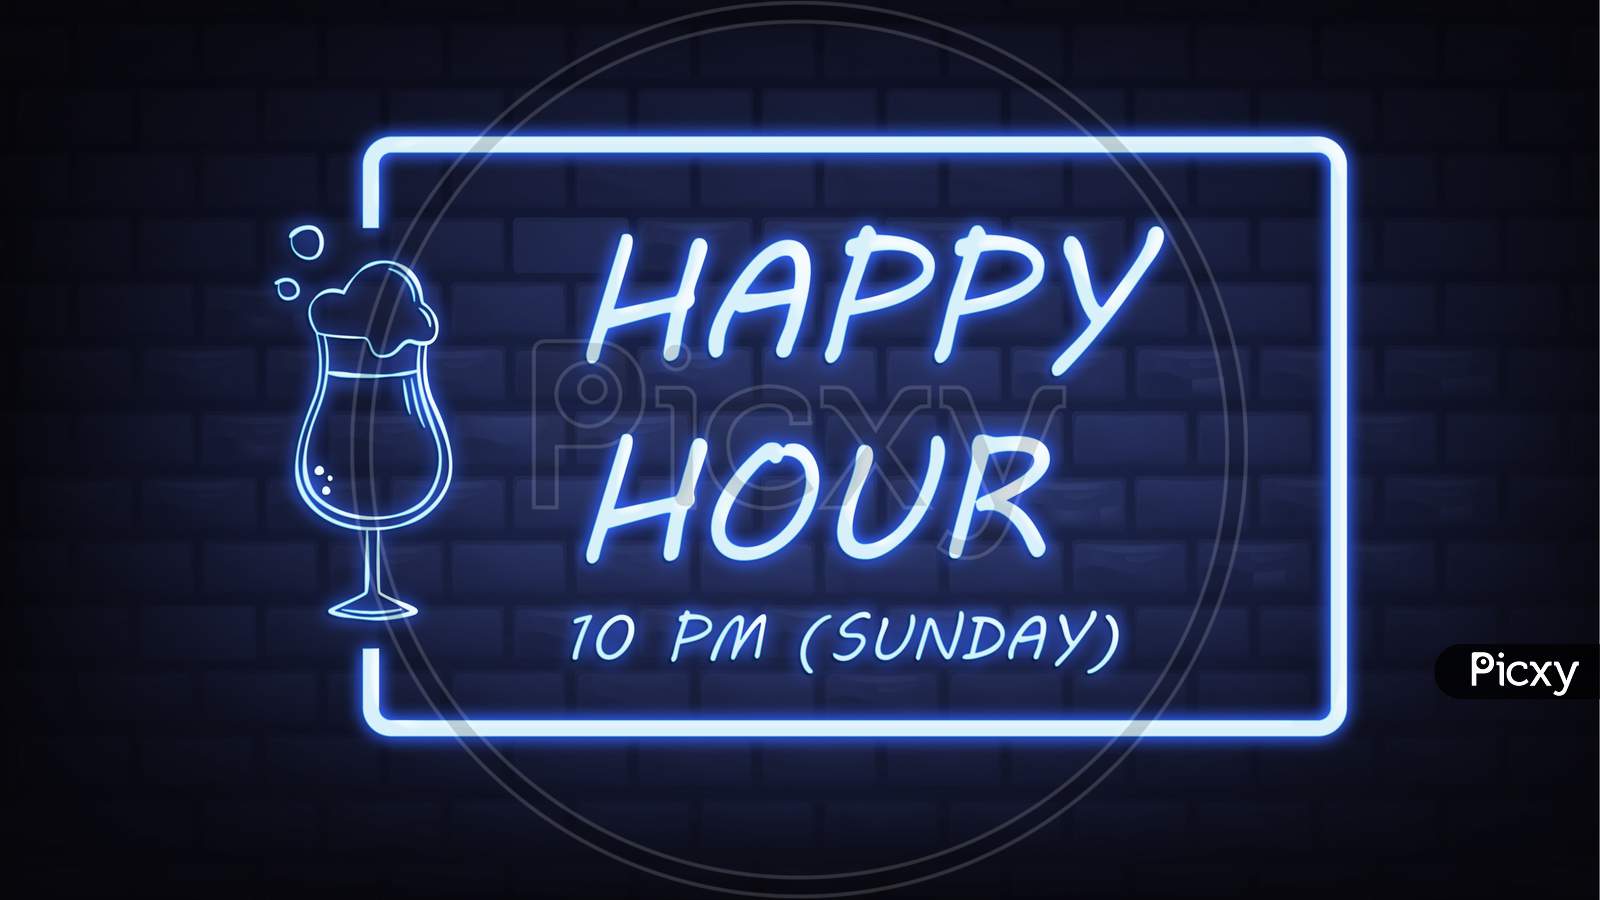 Happy Hour 10 Pm Friiday Neon Words Illustration Use For Landing Page,Website, Poster, Banner Background, Gift Card, Coupon, Label,Sale Promotion, Advertising, Marketing.Bar Sign, Beer Sale Promotion.